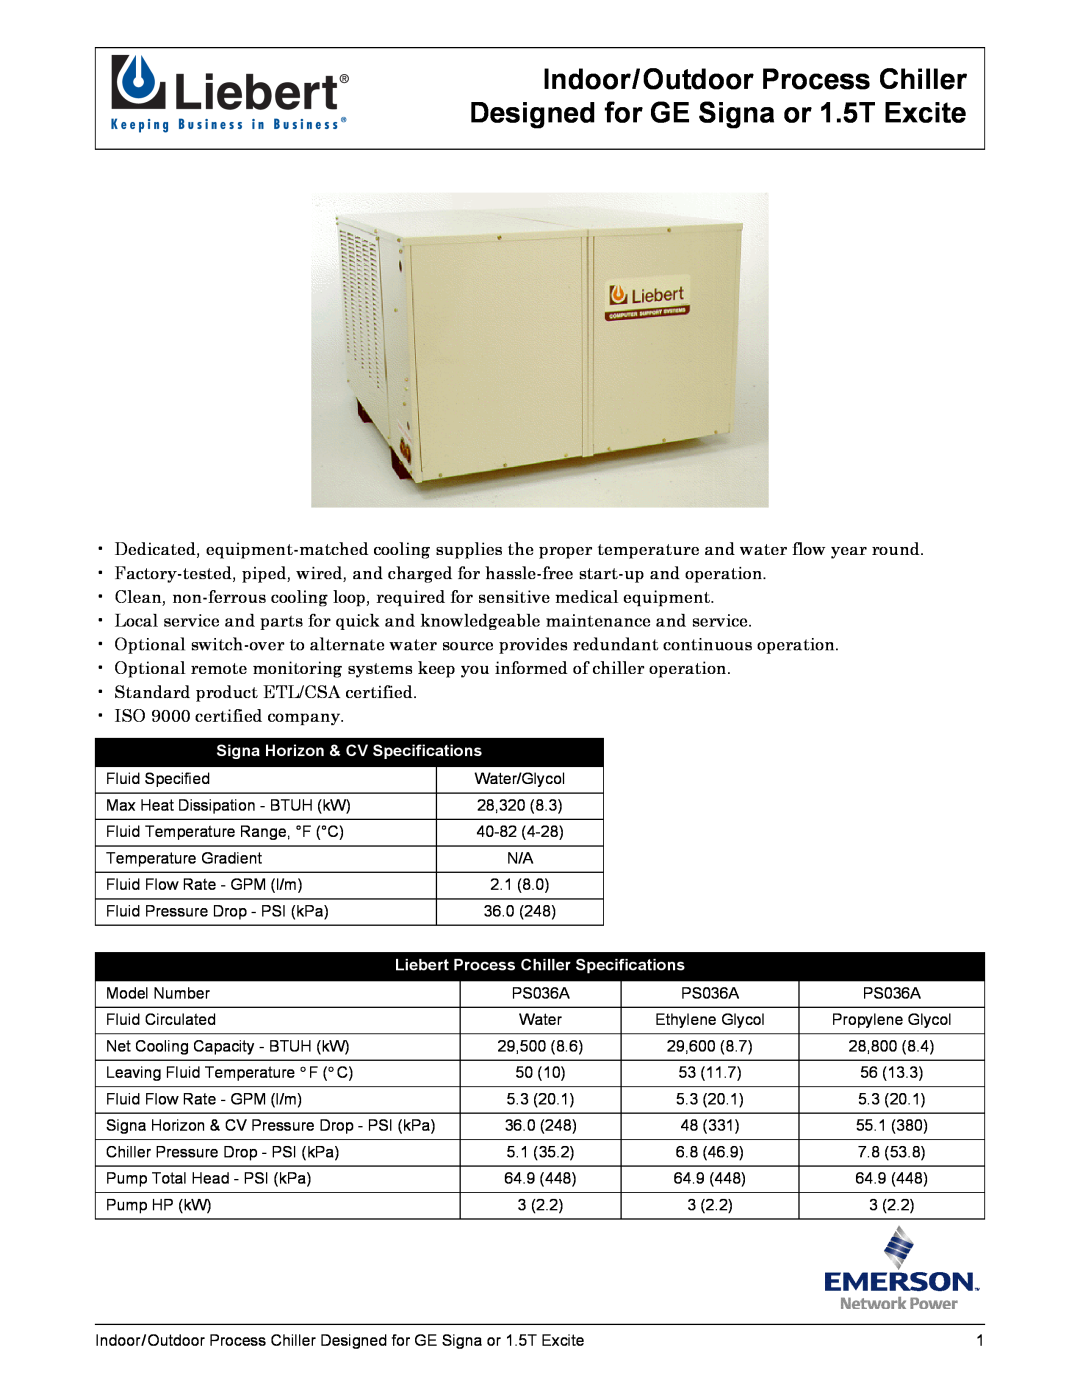 Liebert PS036A specifications Indoor/Outdoor Process Chiller, Designed for GE Signa or 1.5T Excite 